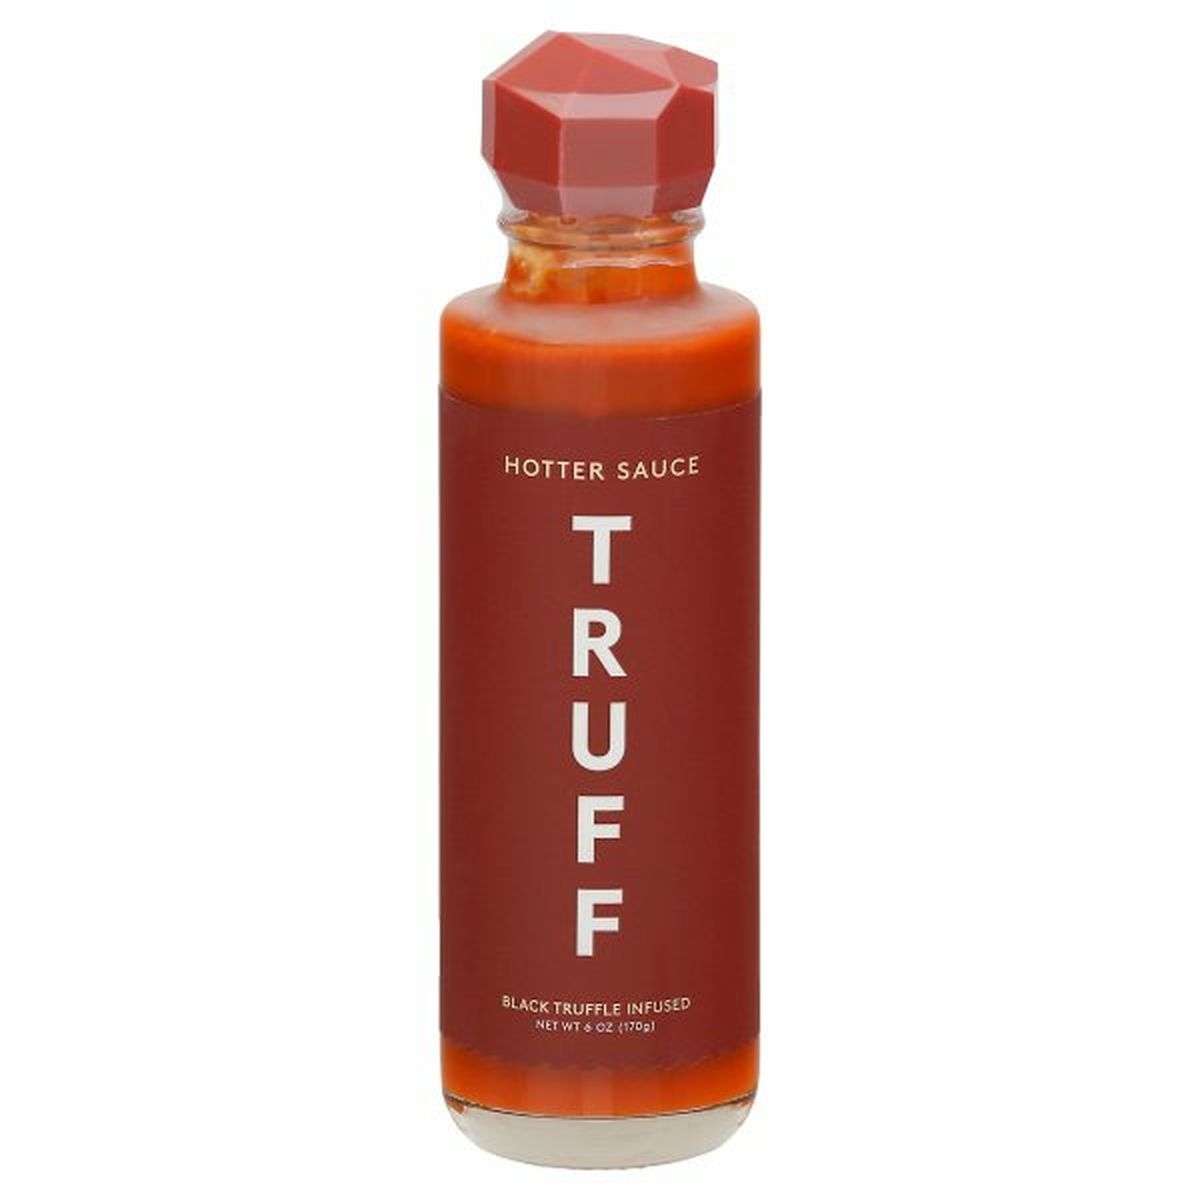 Calories in TRUFF Hotter Sauce, Black Truffle Infused